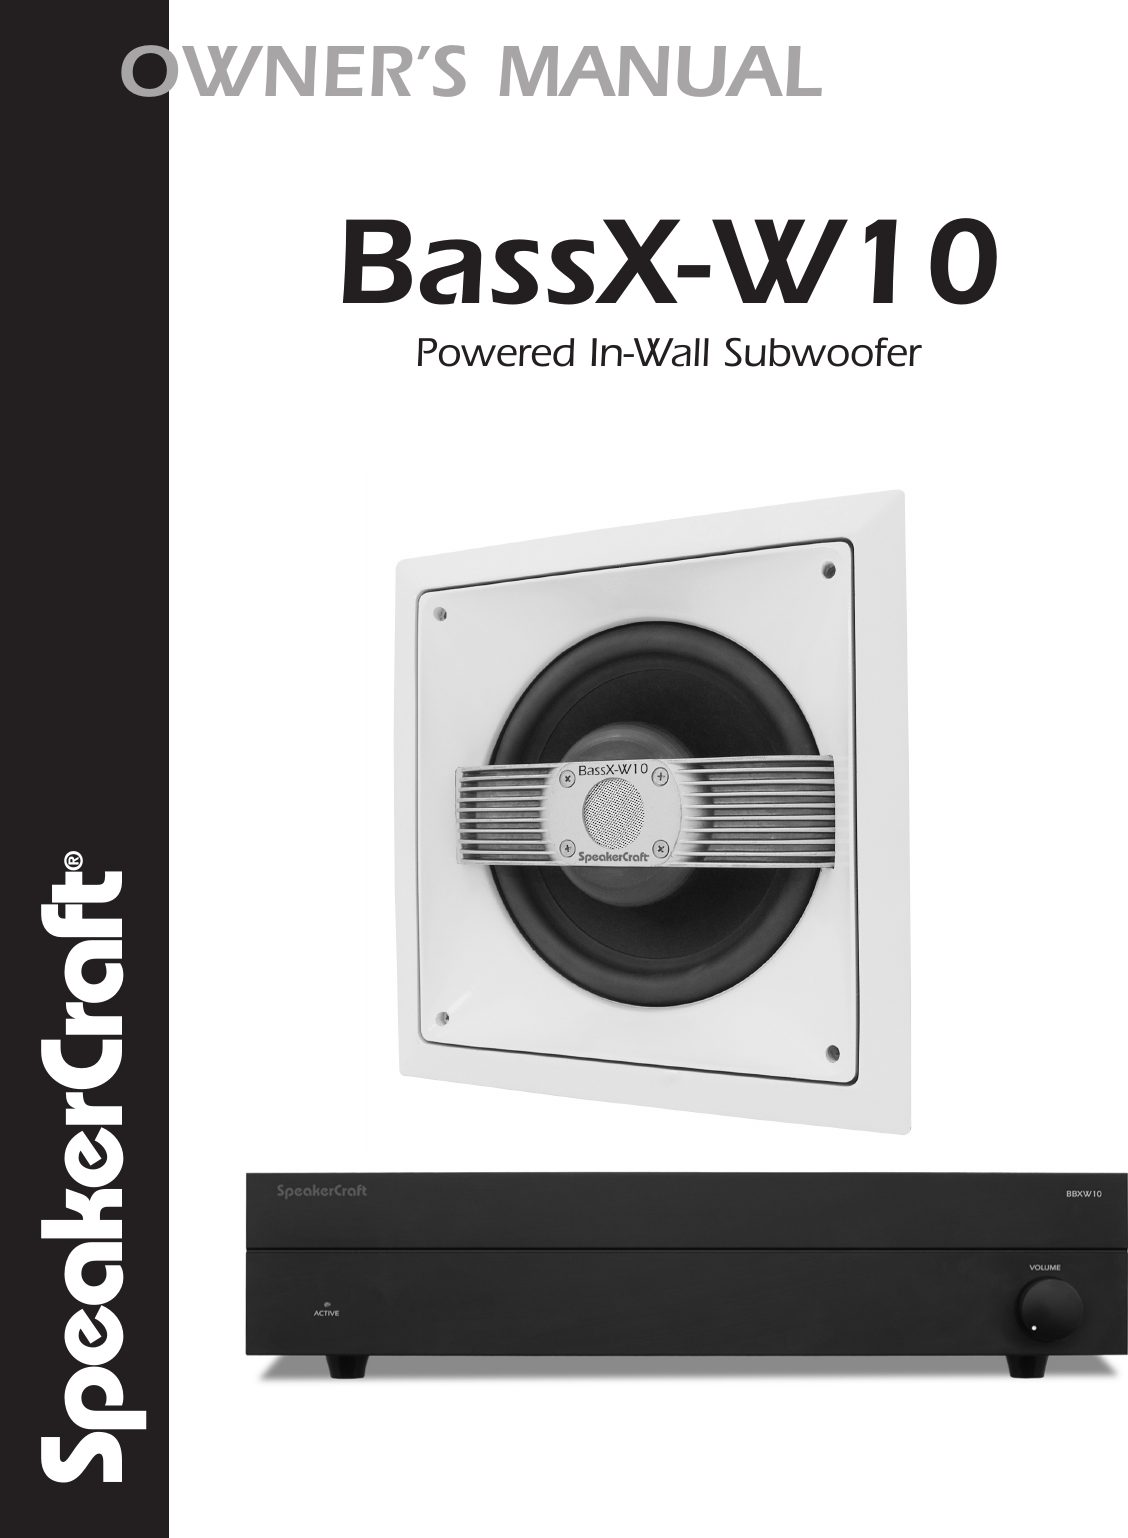 Page 1 of 12 - Speakercraft Speakercraft-Speakercraft-Powered-In-Wall-Subwoofer-Bassx-W10-Users-Manual- BassX-W10 Manual  Speakercraft-speakercraft-powered-in-wall-subwoofer-bassx-w10-users-manual